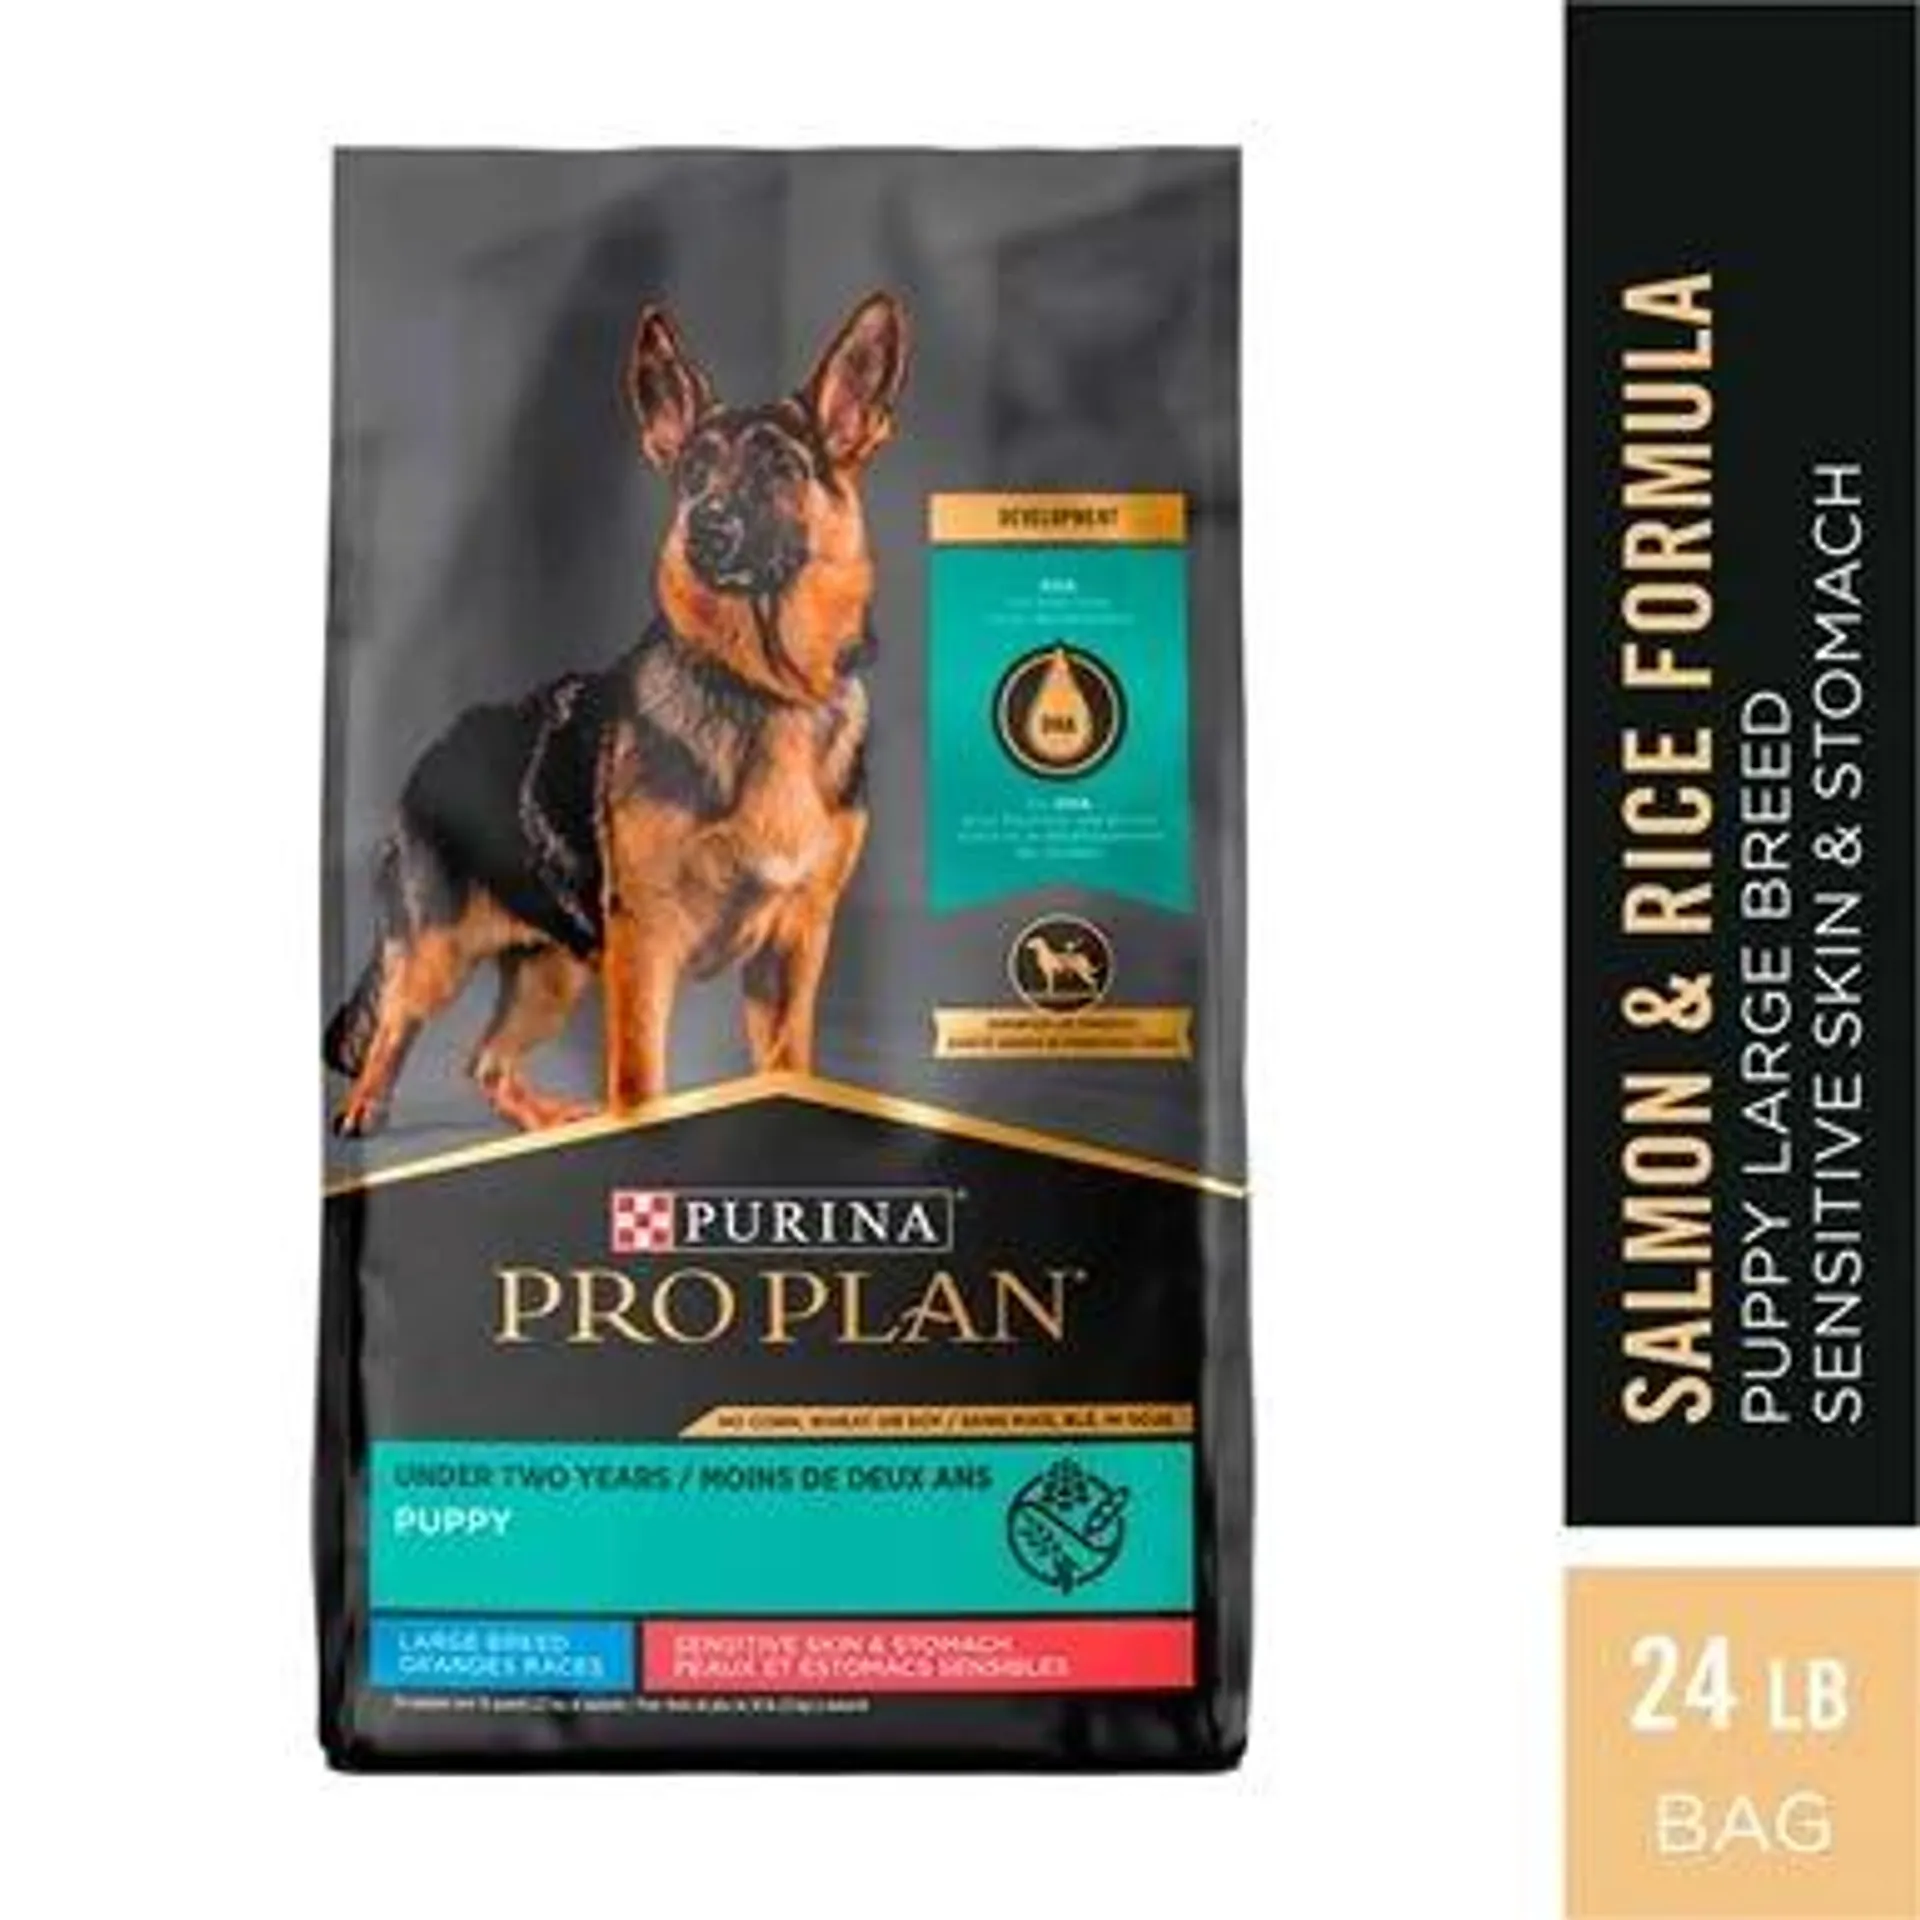 Purina Pro Plan Sensitive Skin and Stomach Large Breed Puppy Food With Probiotics, Salmon & Rice Formula - 24 Pound Bag